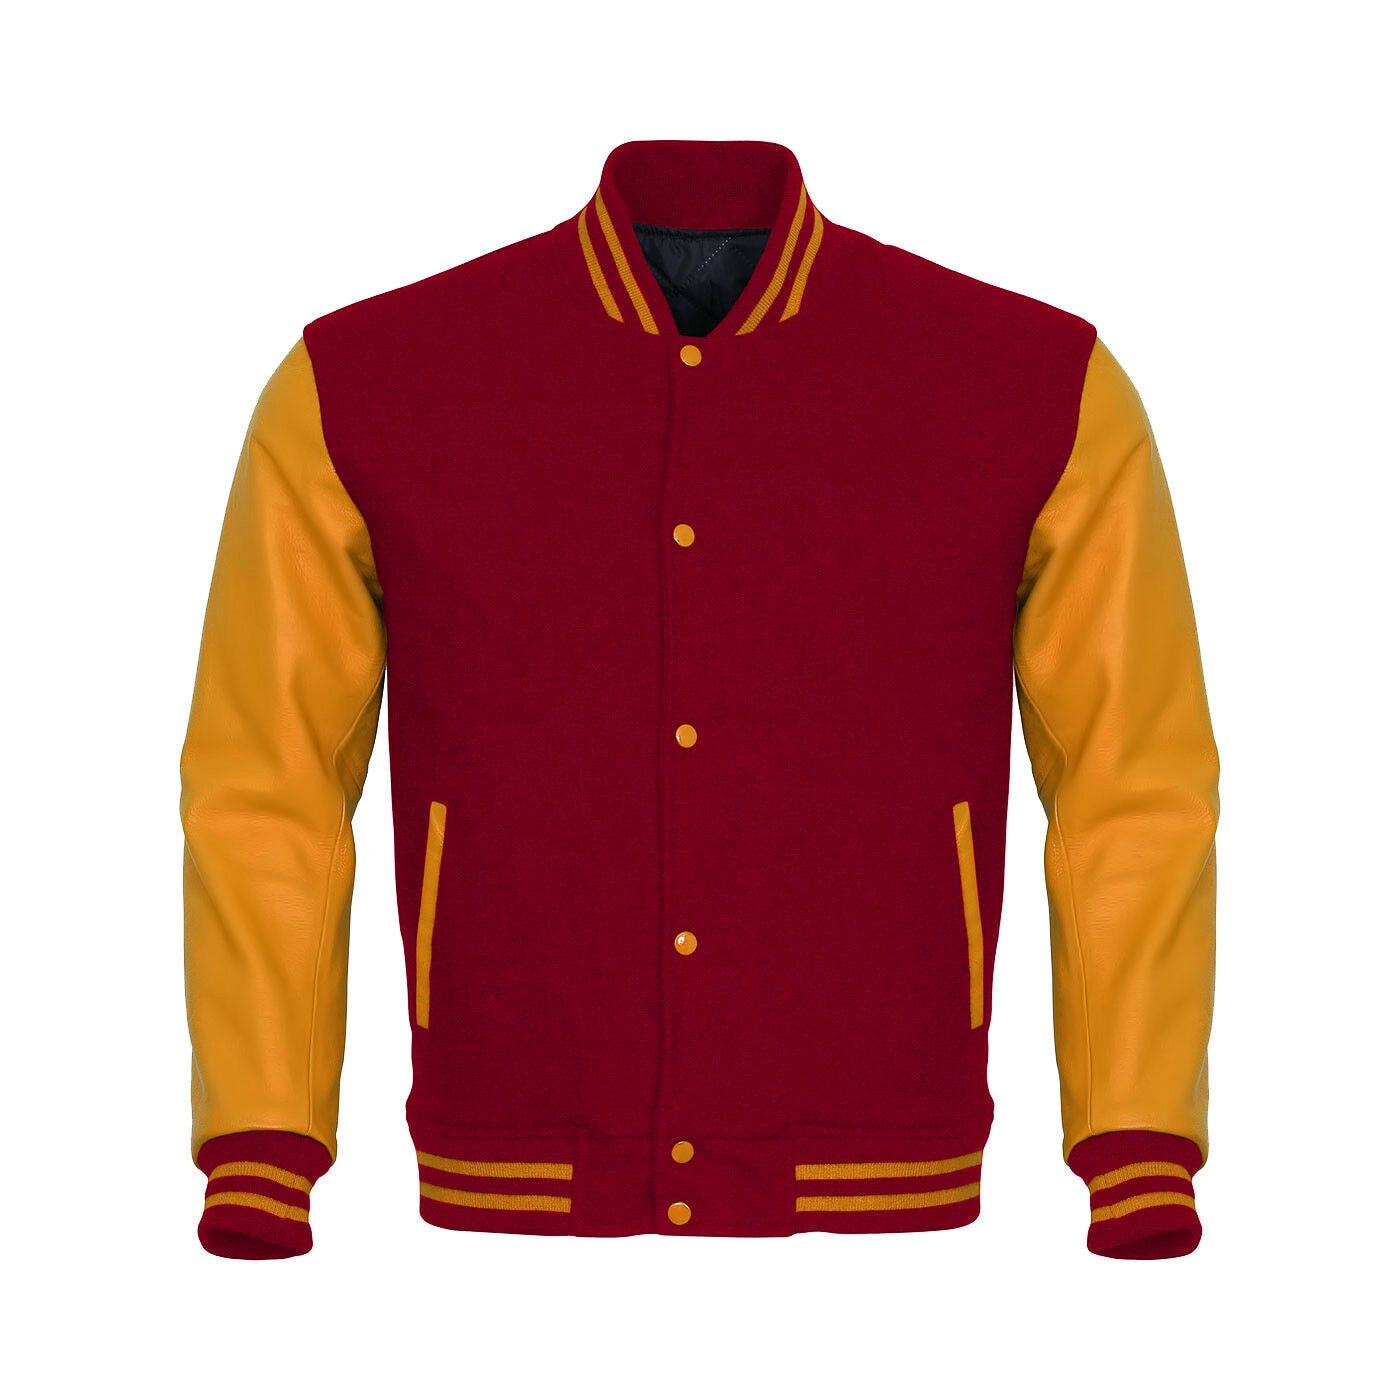 Classic Varsity Letterman Jacket Burgundy Wool with Gold Genuine Leather Sleeves